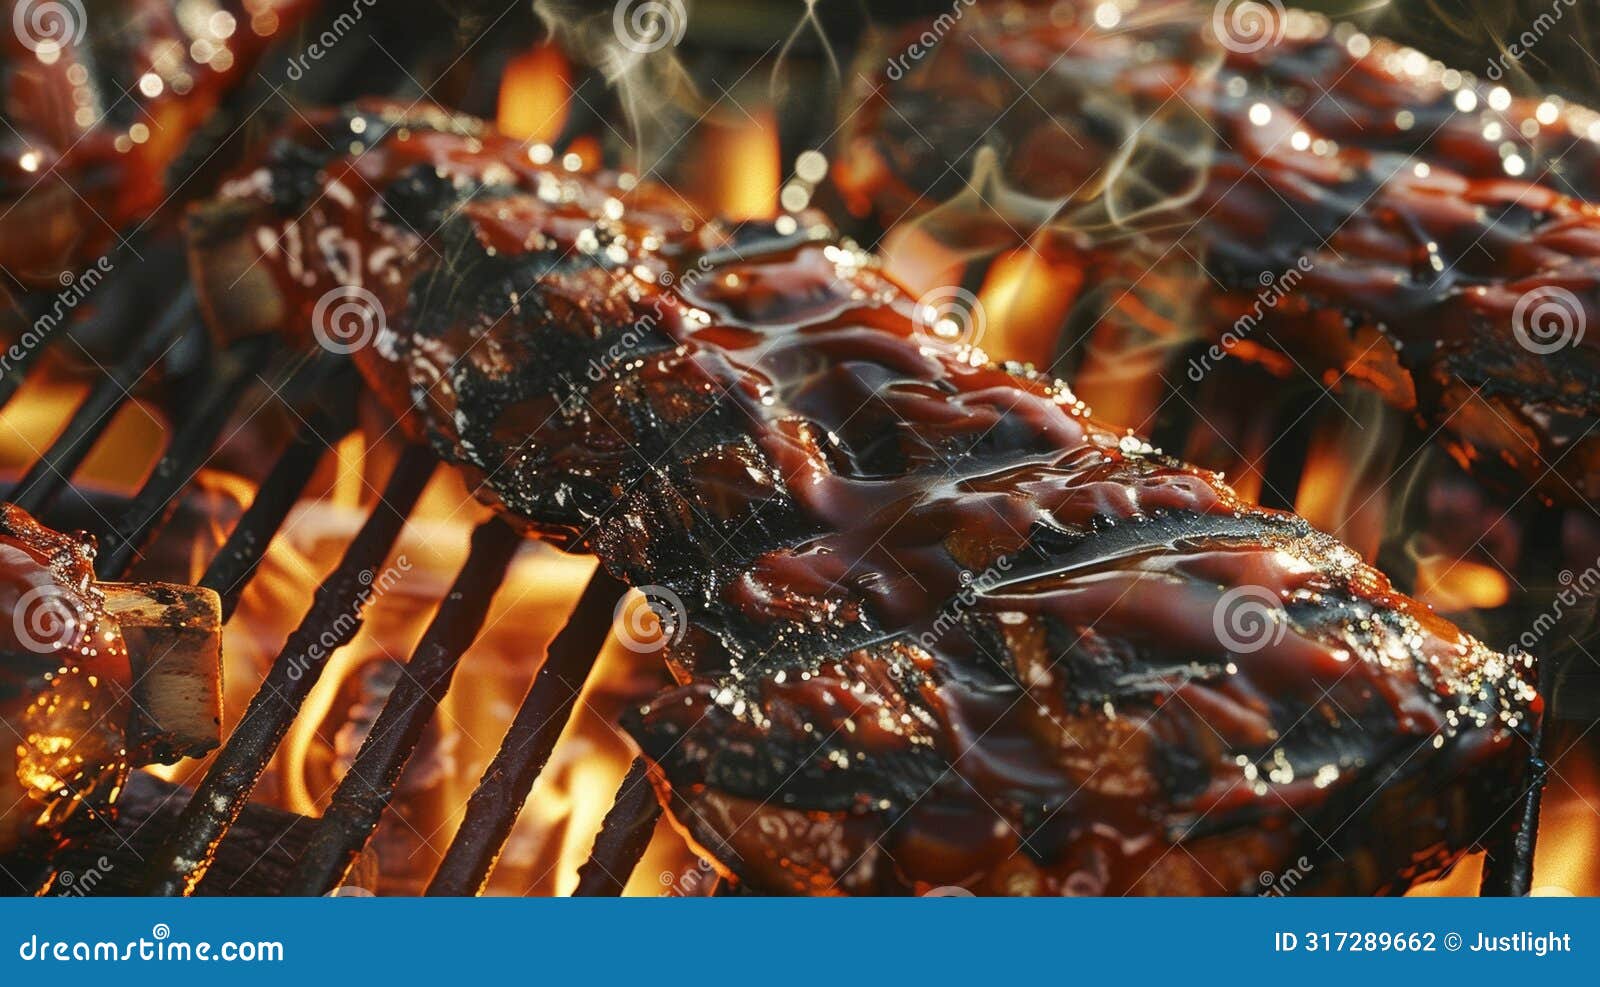 stores also cater to those looking to host a backyard barbecue on the fourth of july. grills charcoal and cooking